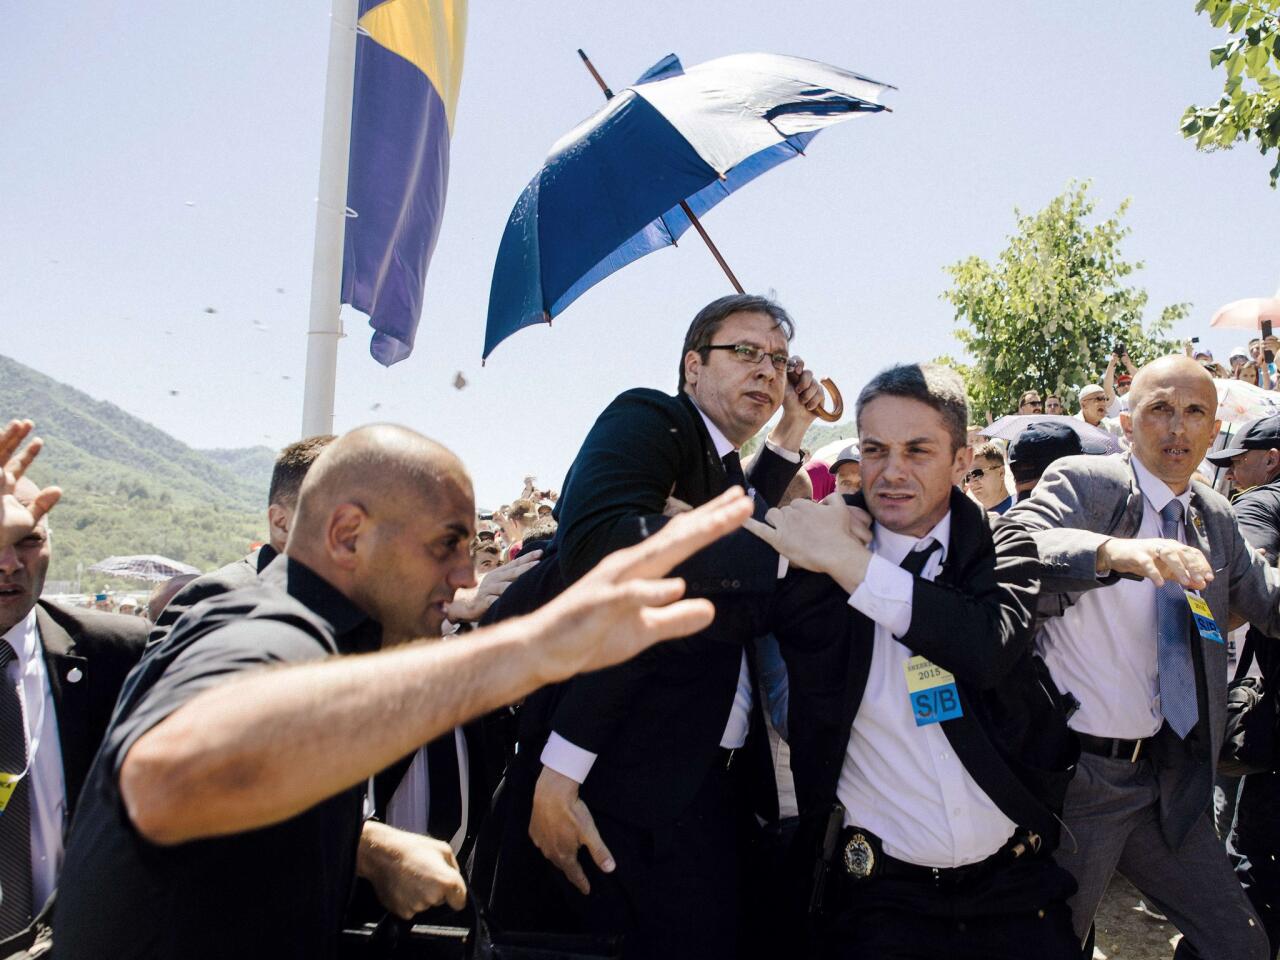 Bodyguards try to protect Serbian Prime Minister Aleksandar Vucic, center, from stones hurled at him by an angry crowd at a commemoration of the 1995 Srebrenica massacre on July 11, 2015, near Srebrenica in Bosnia-Herzegovina.